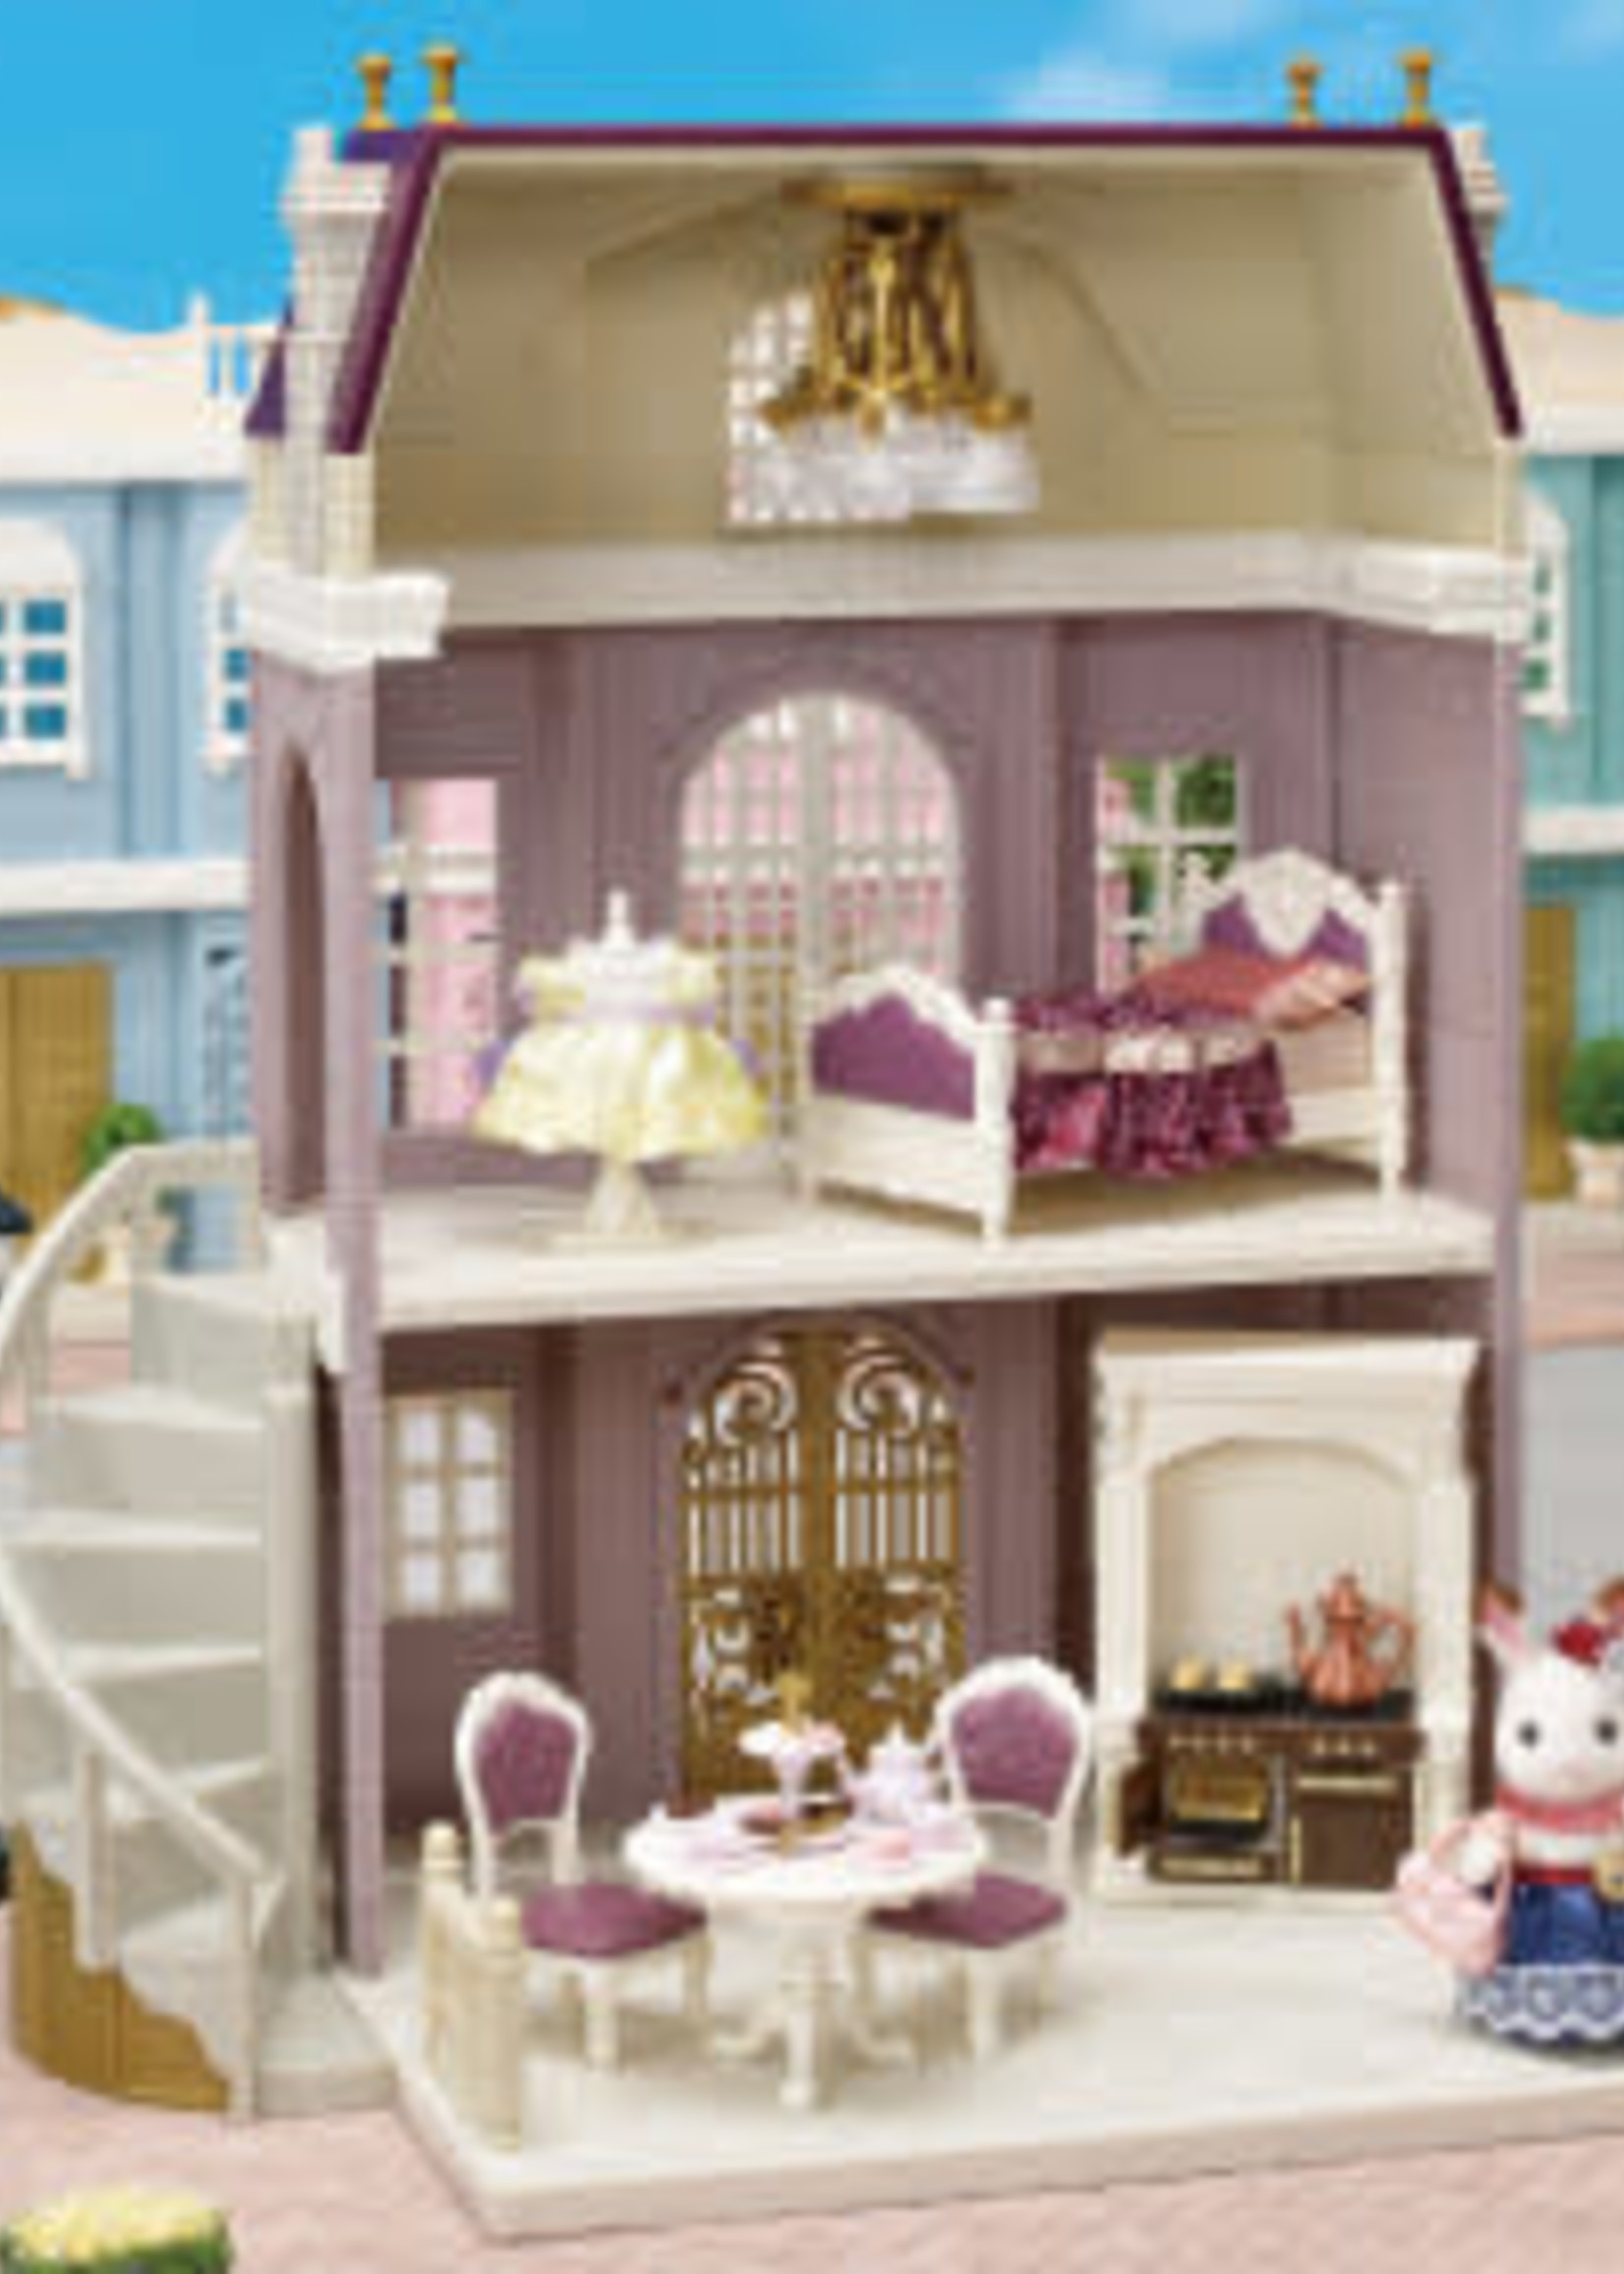 Calico Critters Elegant Town Manor Gift Set